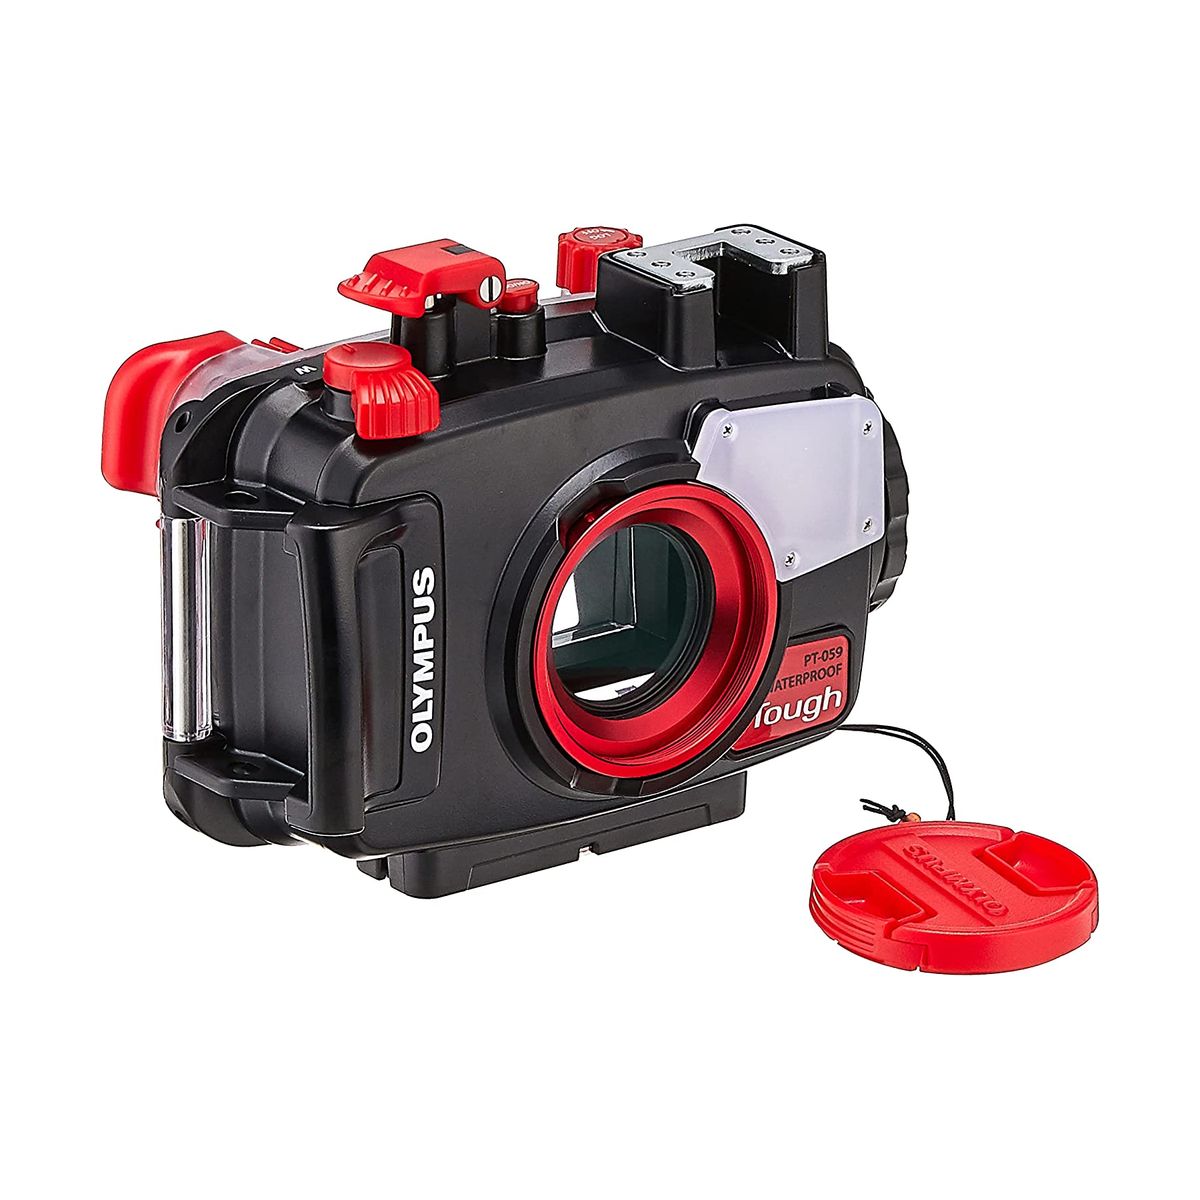 Olympus PT-059 Underwater Housing for the TG-6